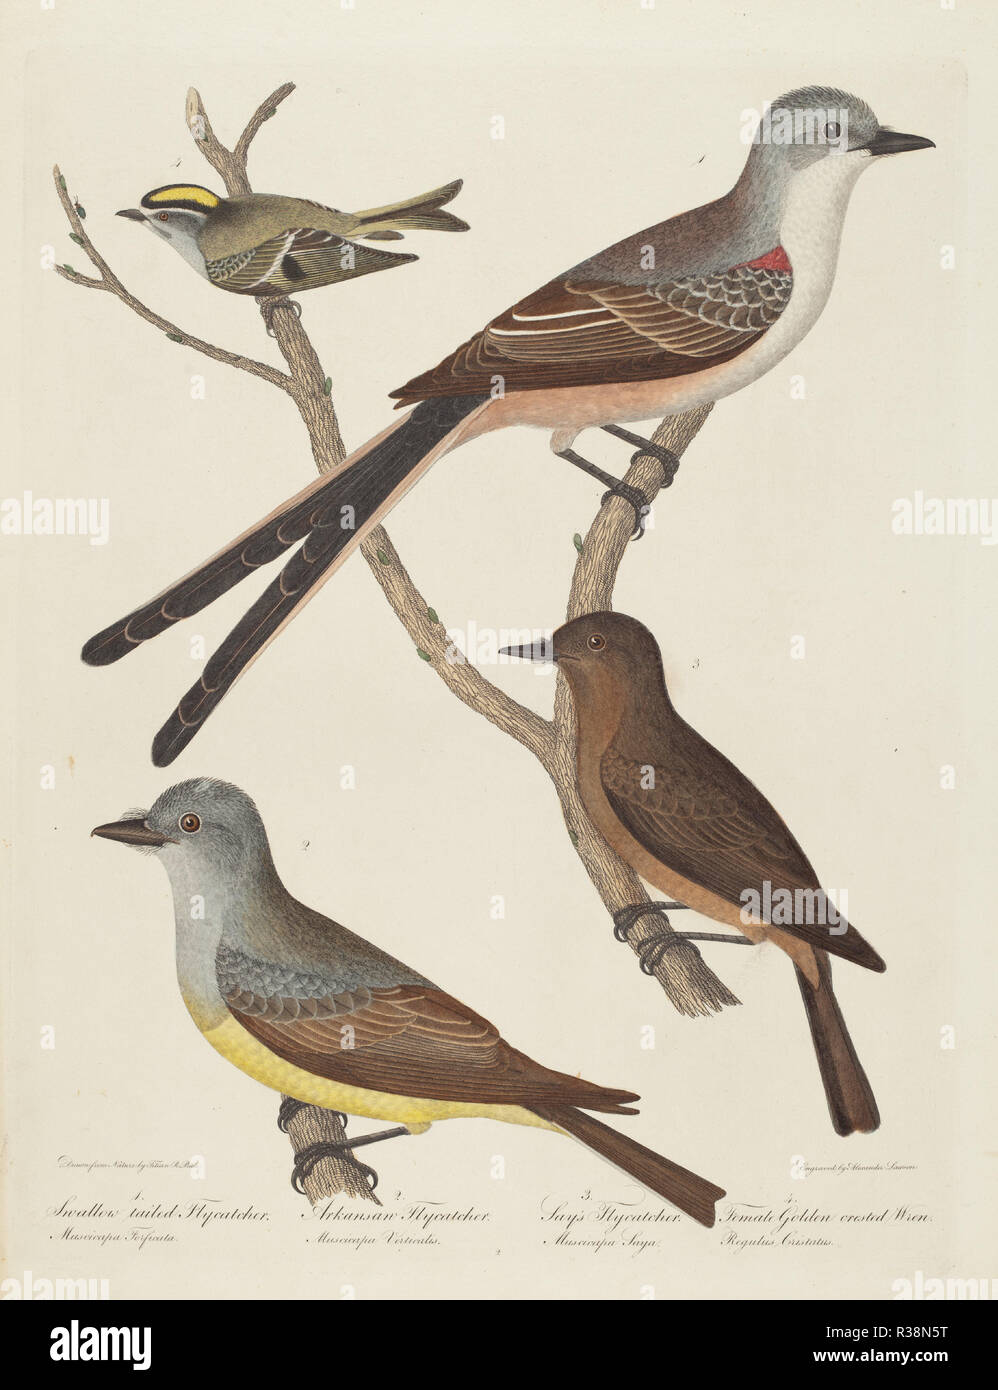 Swallow-tailed Flycatcher, Arkansas Flycatcher, Say's Flycatcher, and Female Golden-crested Wren. Dimensions: plate: 33.2 x 25.7 cm (13 1/16 x 10 1/8 in.)  sheet: 37.5 x 29.4 cm (14 3/4 x 11 9/16 in.). Medium: hand-colored engraving with etching on wove paper. Museum: National Gallery of Art, Washington DC. Author: Alexander Lawson after Titian Ramsay Peale. Stock Photo